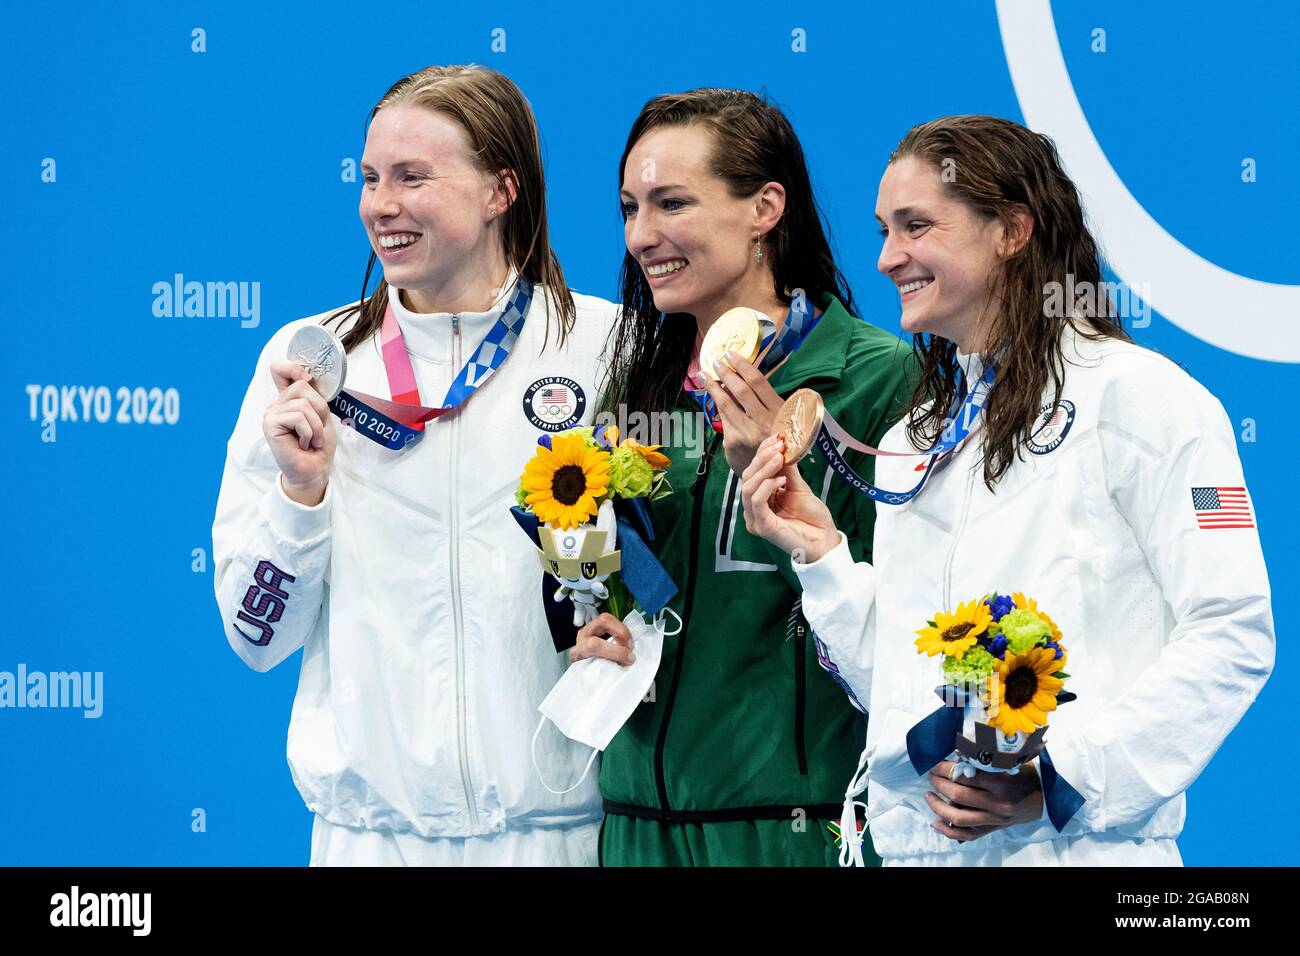 Tokyo, Japan. 30th July, 2021. TOKYO, JAPAN - JULY 30: Lilly King of United States, silver, Tatjana Schoenmaker of Republic of South Africa, gold, and Annie Lazor of United States, bronze, show the medals after competing in the women 200m Breaststroke final during the Tokyo 2020 Olympic Games at the Tokyo Aquatics Centre on July 30, 2021 in Tokyo, Japan (Photo by Giorgio Scala/Insidefoto/Deepbluemedia) Credit: insidefoto srl/Alamy Live News Stock Photo